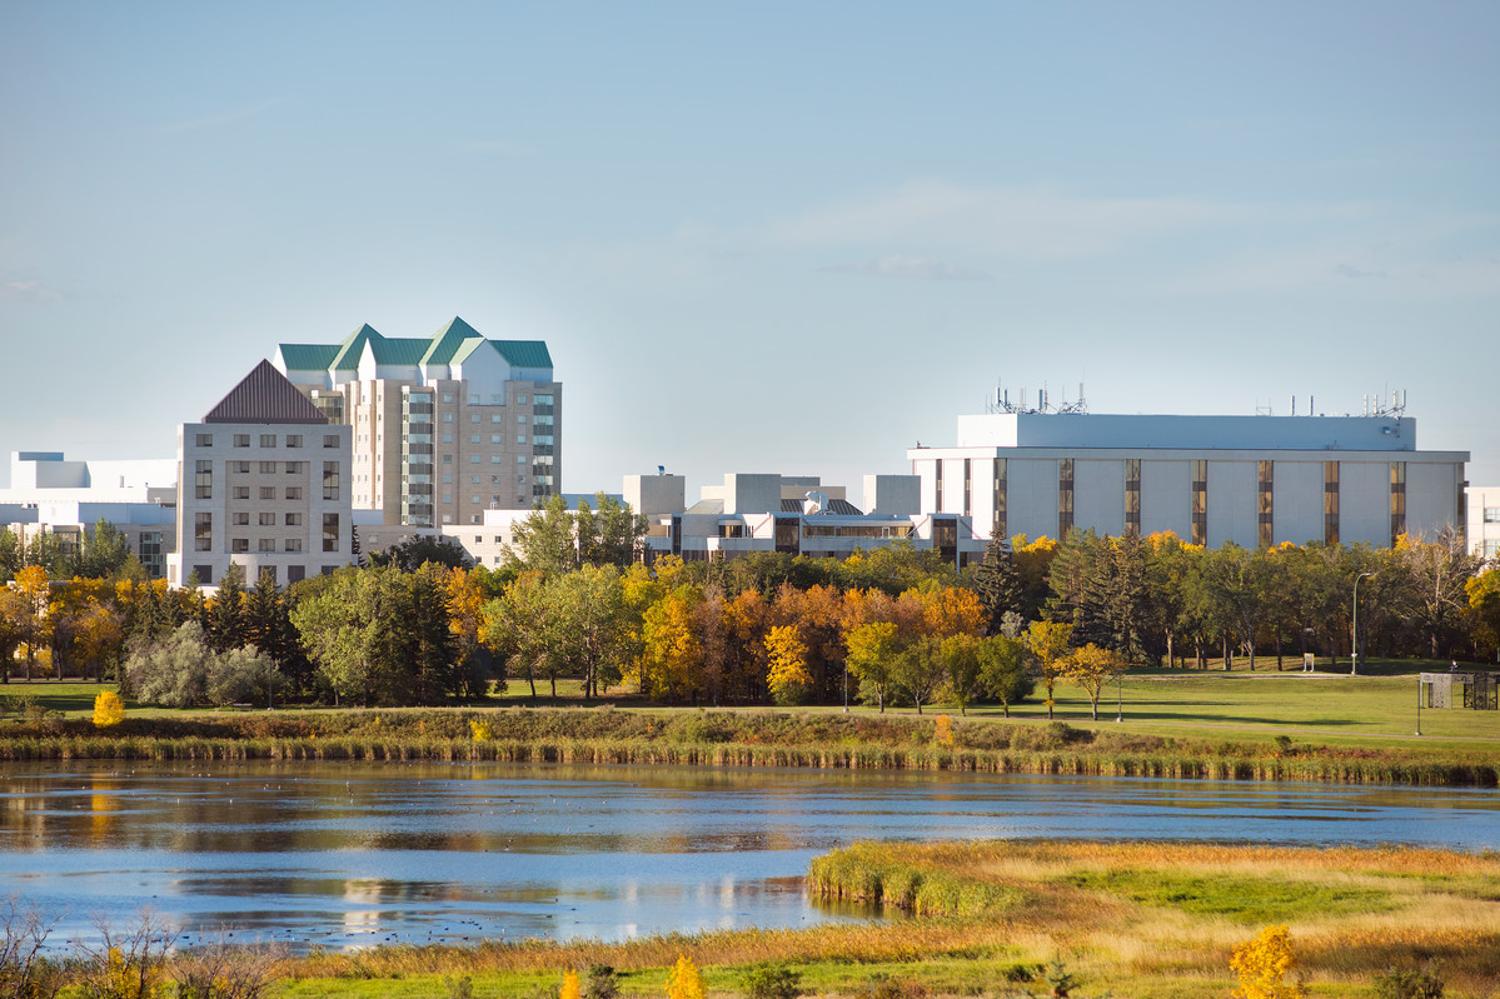 Landscape view of campus from across Wascana Lake.